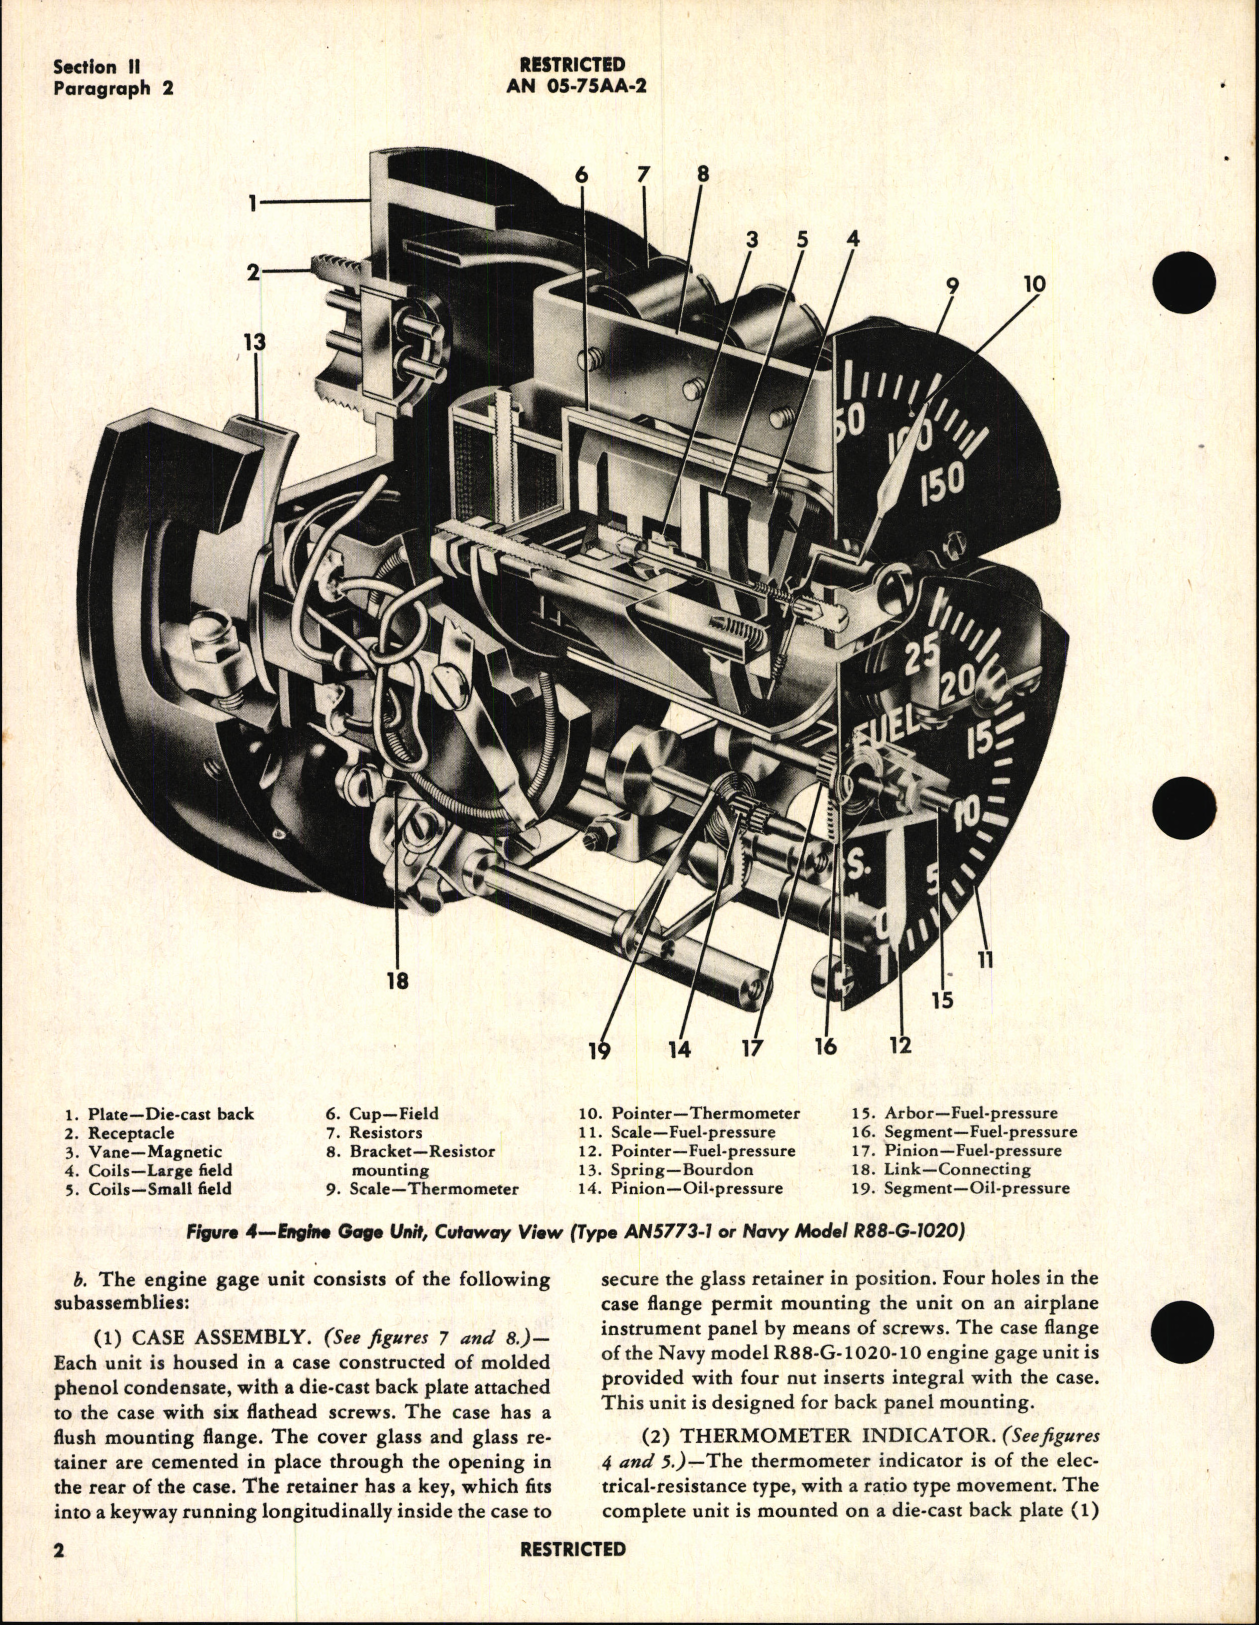 Sample page 8 from AirCorps Library document: Operation, Service, & Overhaul Instructions with Parts Catalog for Engine Gage Unit